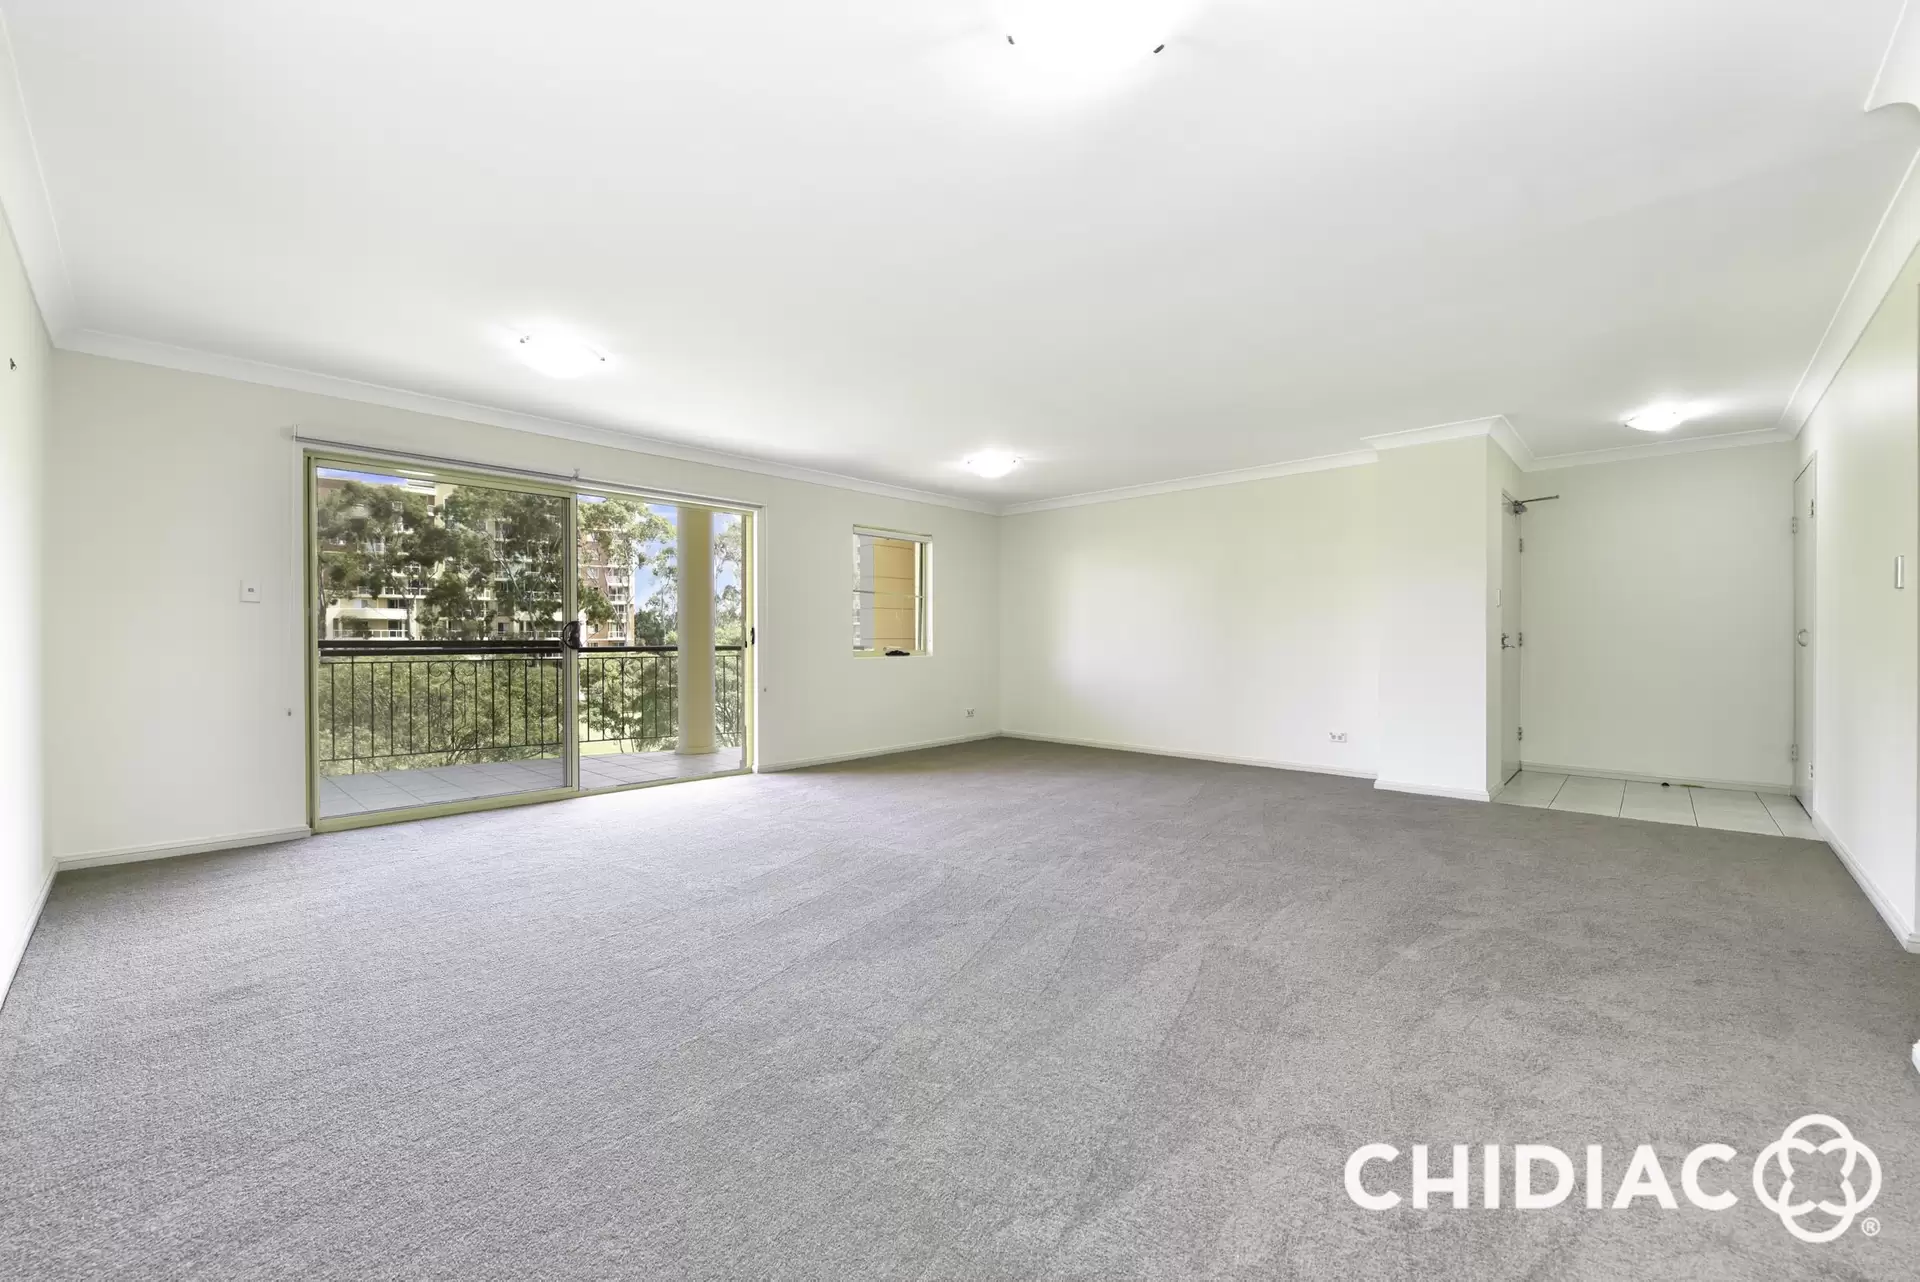 24/1 Bradley Place, Liberty Grove Leased by Chidiac Realty - image 1